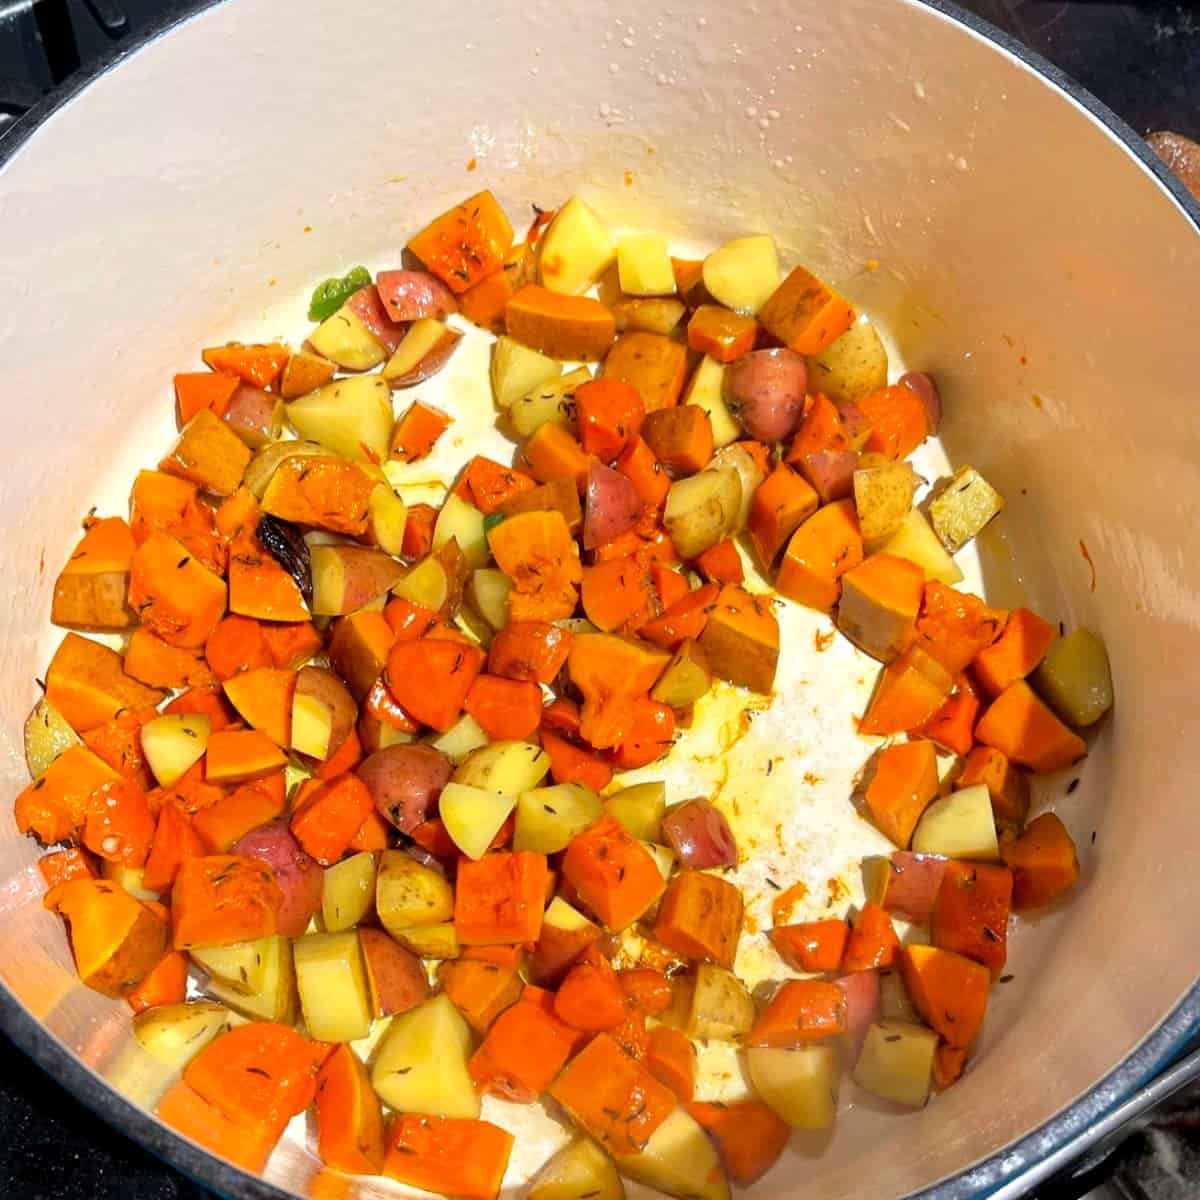 Potatoes and carrots in Dutch oven.